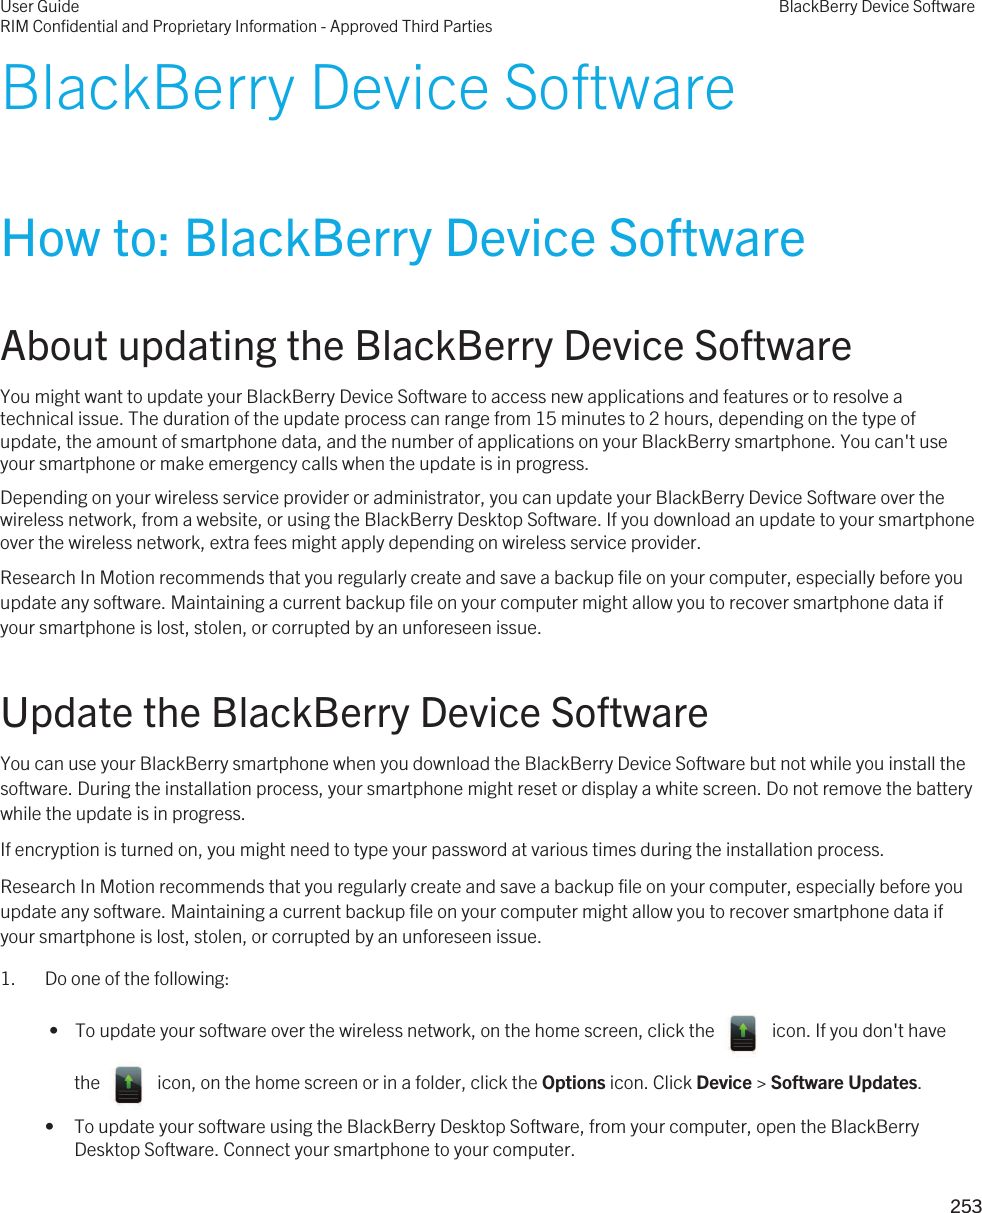 BlackBerry Device SoftwareHow to: BlackBerry Device SoftwareAbout updating the BlackBerry Device SoftwareYou might want to update your BlackBerry Device Software to access new applications and features or to resolve a technical issue. The duration of the update process can range from 15 minutes to 2 hours, depending on the type of update, the amount of smartphone data, and the number of applications on your BlackBerry smartphone. You can&apos;t use your smartphone or make emergency calls when the update is in progress.Depending on your wireless service provider or administrator, you can update your BlackBerry Device Software over the wireless network, from a website, or using the BlackBerry Desktop Software. If you download an update to your smartphone over the wireless network, extra fees might apply depending on wireless service provider.Research In Motion recommends that you regularly create and save a backup file on your computer, especially before you update any software. Maintaining a current backup file on your computer might allow you to recover smartphone data if your smartphone is lost, stolen, or corrupted by an unforeseen issue.Update the BlackBerry Device SoftwareYou can use your BlackBerry smartphone when you download the BlackBerry Device Software but not while you install the software. During the installation process, your smartphone might reset or display a white screen. Do not remove the battery while the update is in progress.If encryption is turned on, you might need to type your password at various times during the installation process.Research In Motion recommends that you regularly create and save a backup file on your computer, especially before you update any software. Maintaining a current backup file on your computer might allow you to recover smartphone data if your smartphone is lost, stolen, or corrupted by an unforeseen issue.1. Do one of the following: •  To update your software over the wireless network, on the home screen, click the    icon. If you don&apos;t have the    icon, on the home screen or in a folder, click the Options icon. Click Device &gt; Software Updates.• To update your software using the BlackBerry Desktop Software, from your computer, open the BlackBerry Desktop Software. Connect your smartphone to your computer.User GuideRIM Confidential and Proprietary Information - Approved Third PartiesBlackBerry Device Software253 